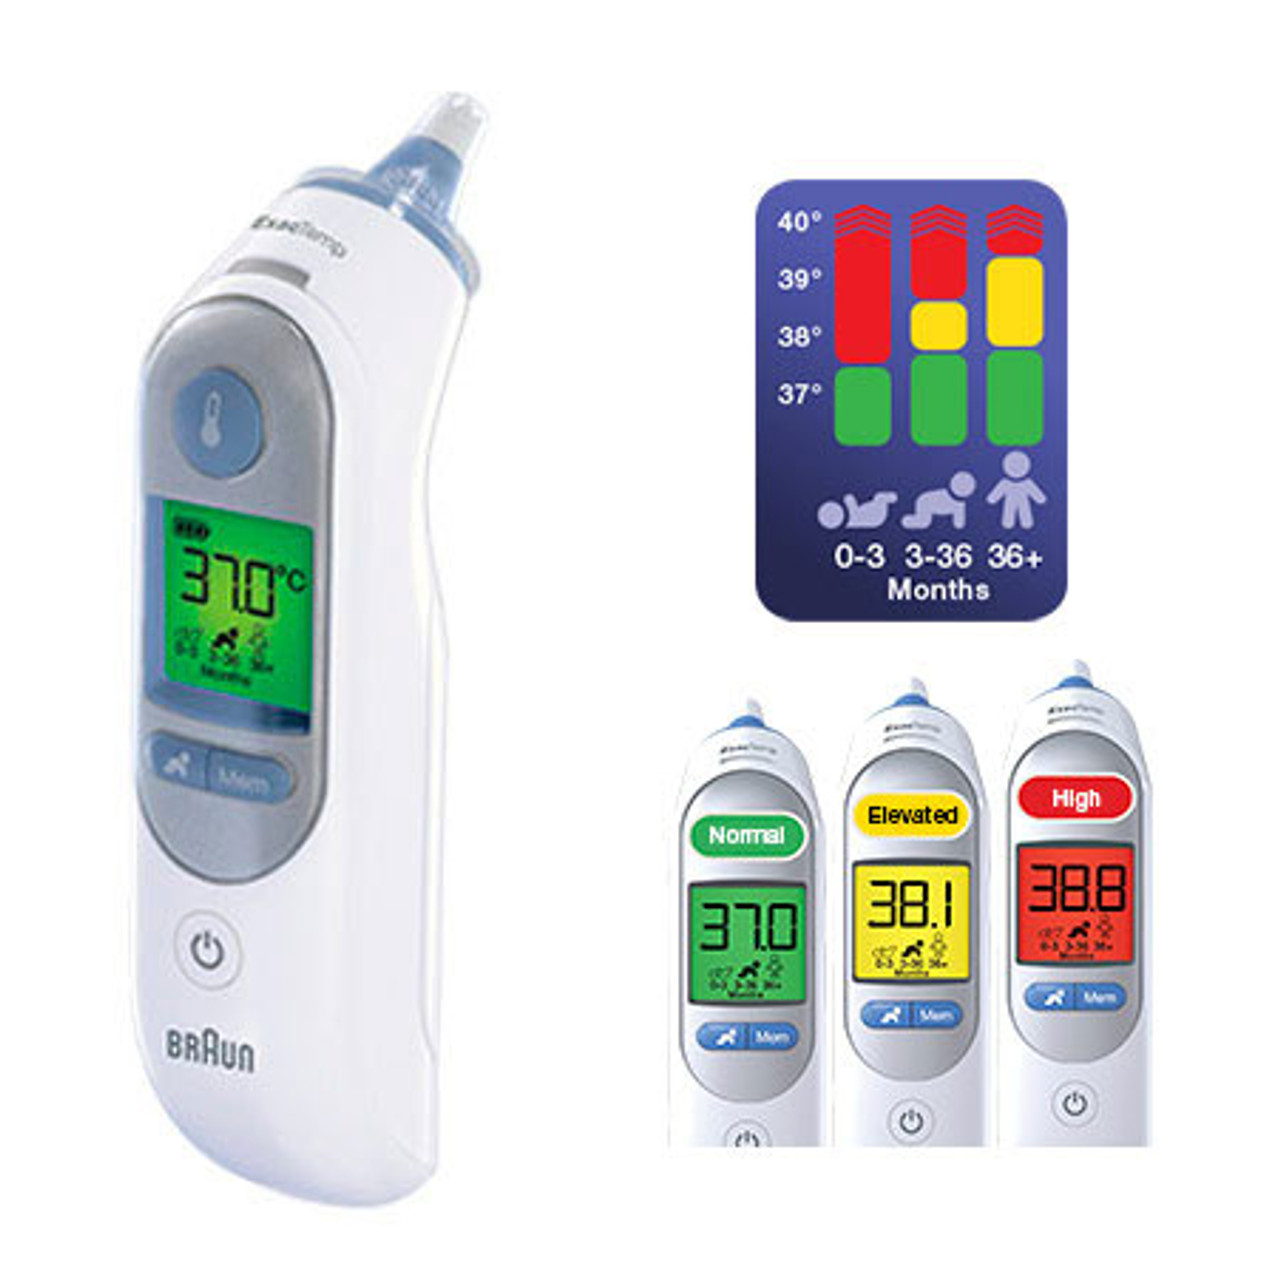  Braun Digital Ear Thermometer for Babies, Kids, Toddlers and  Adults, ThermoScan 5 IRT6500, Display is Digital and Accurate, Thermometer  for Precise Fever Tracking at Home : Health & Household